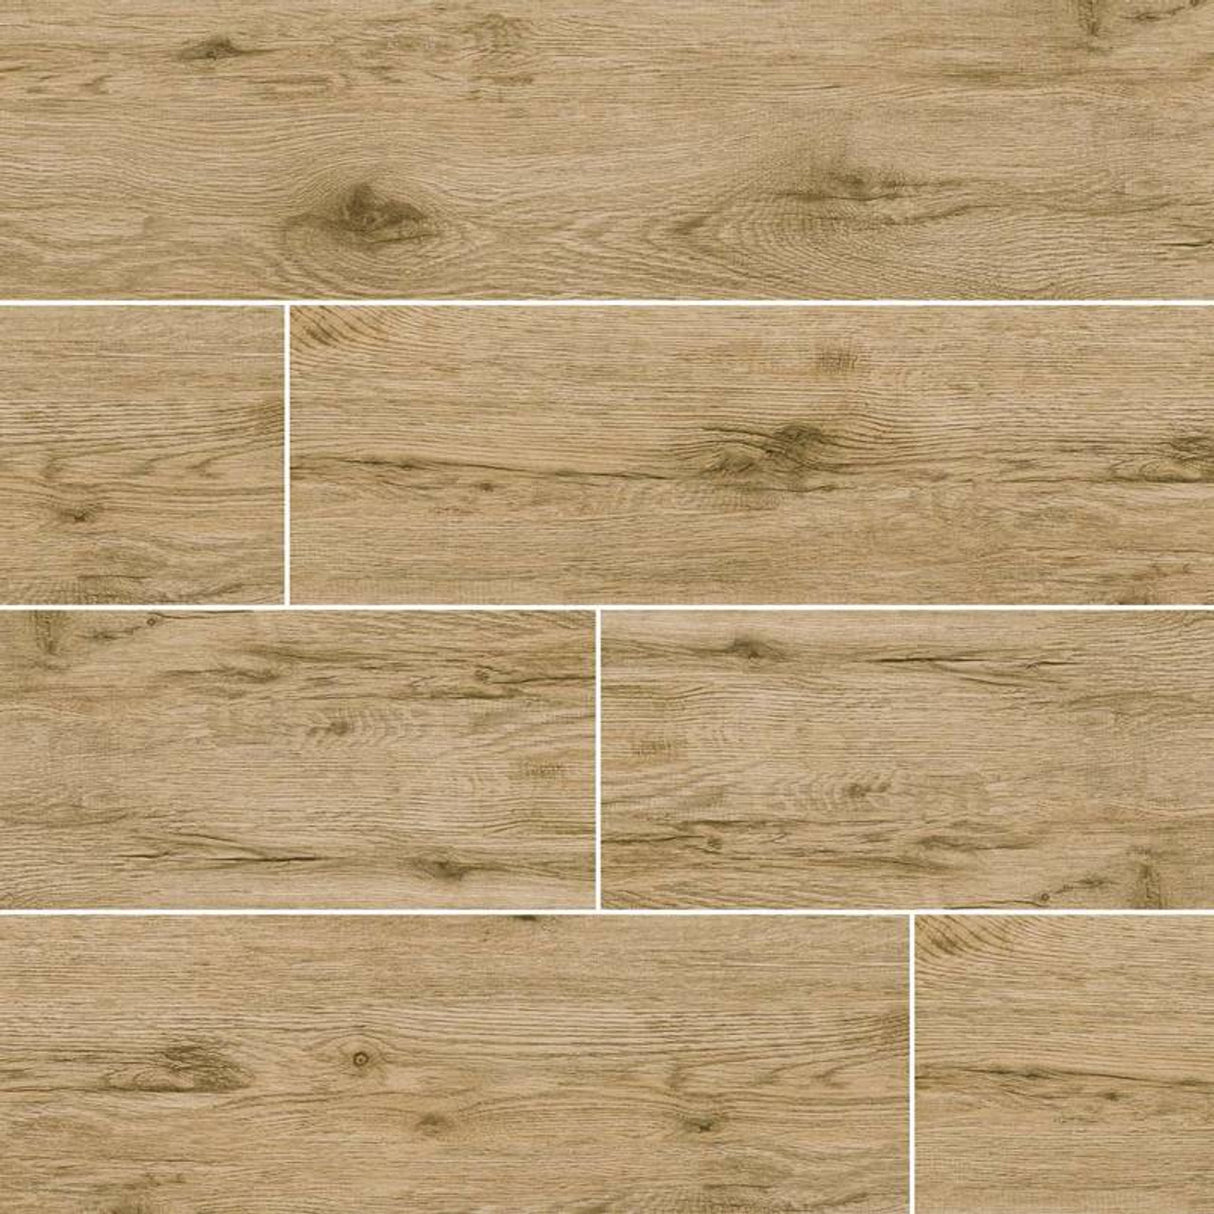 Celeste Taupe 8"x40" Glazed Ceramic Floor and Wall Tile- MSI Collection CELESTE TAUPE 8X40 (Case)